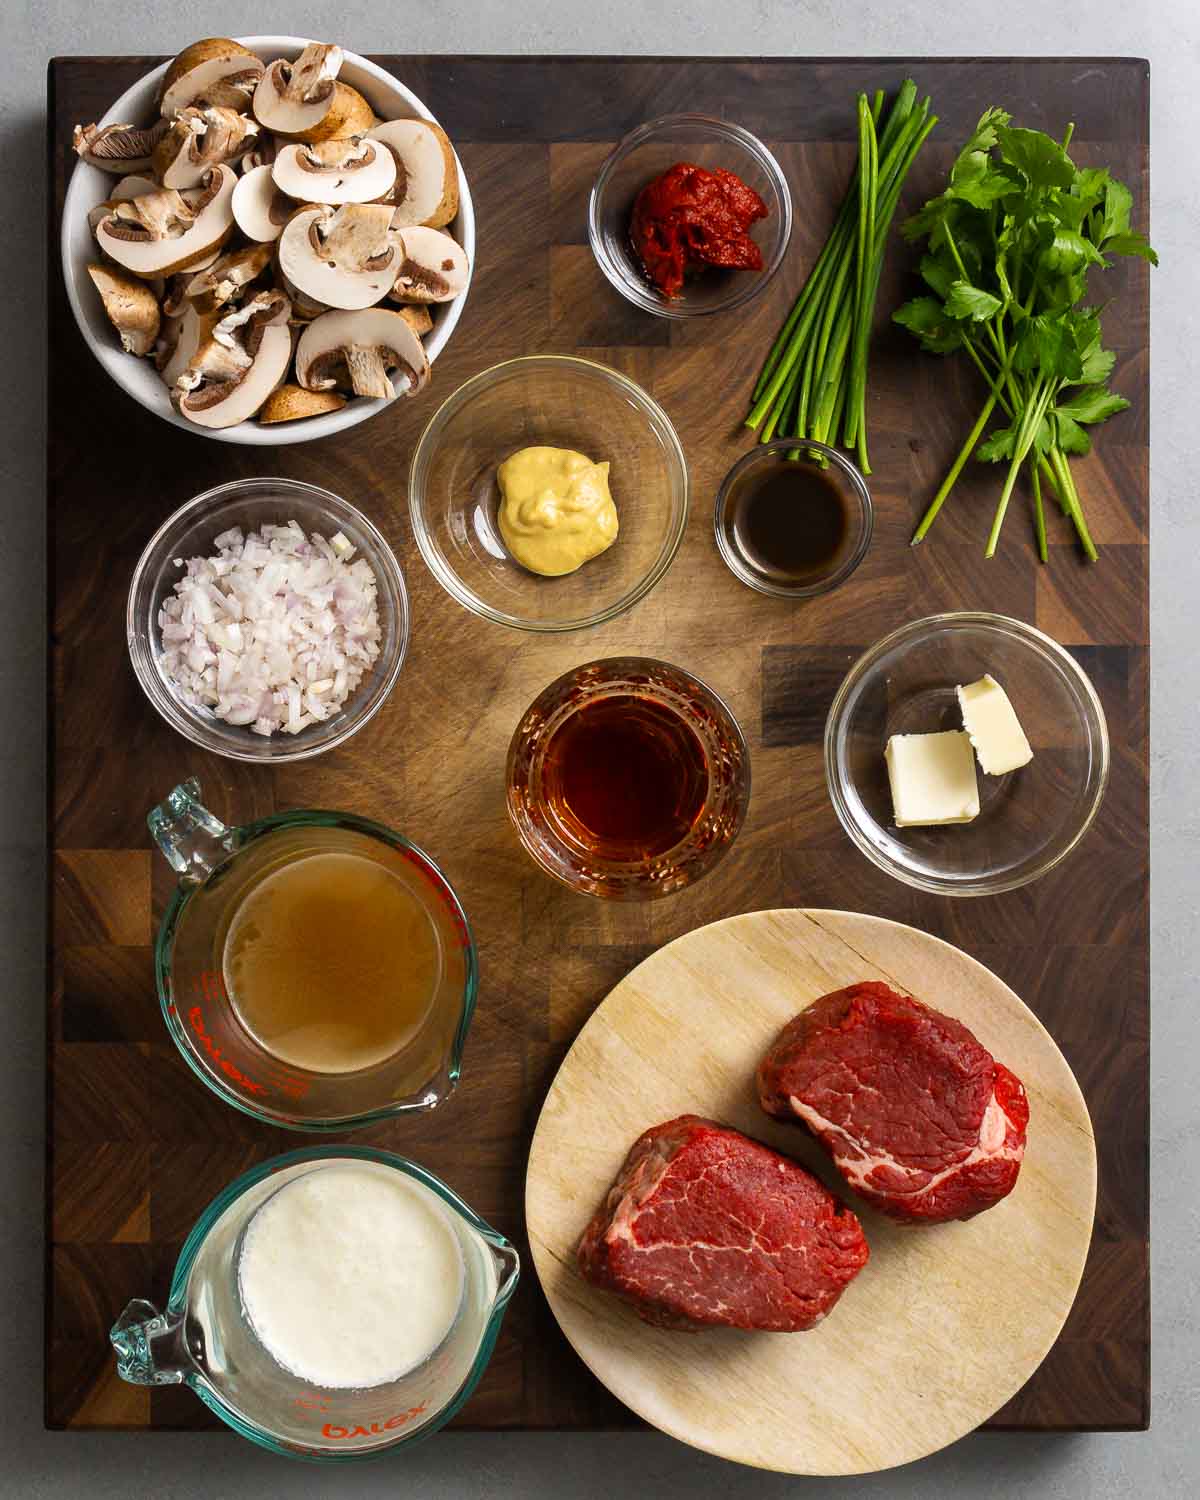 Mise en place example showing: mushrooms, tomato paste, herbs, mustard, shallot, wine, butter, stock, cream, and filet mignon.